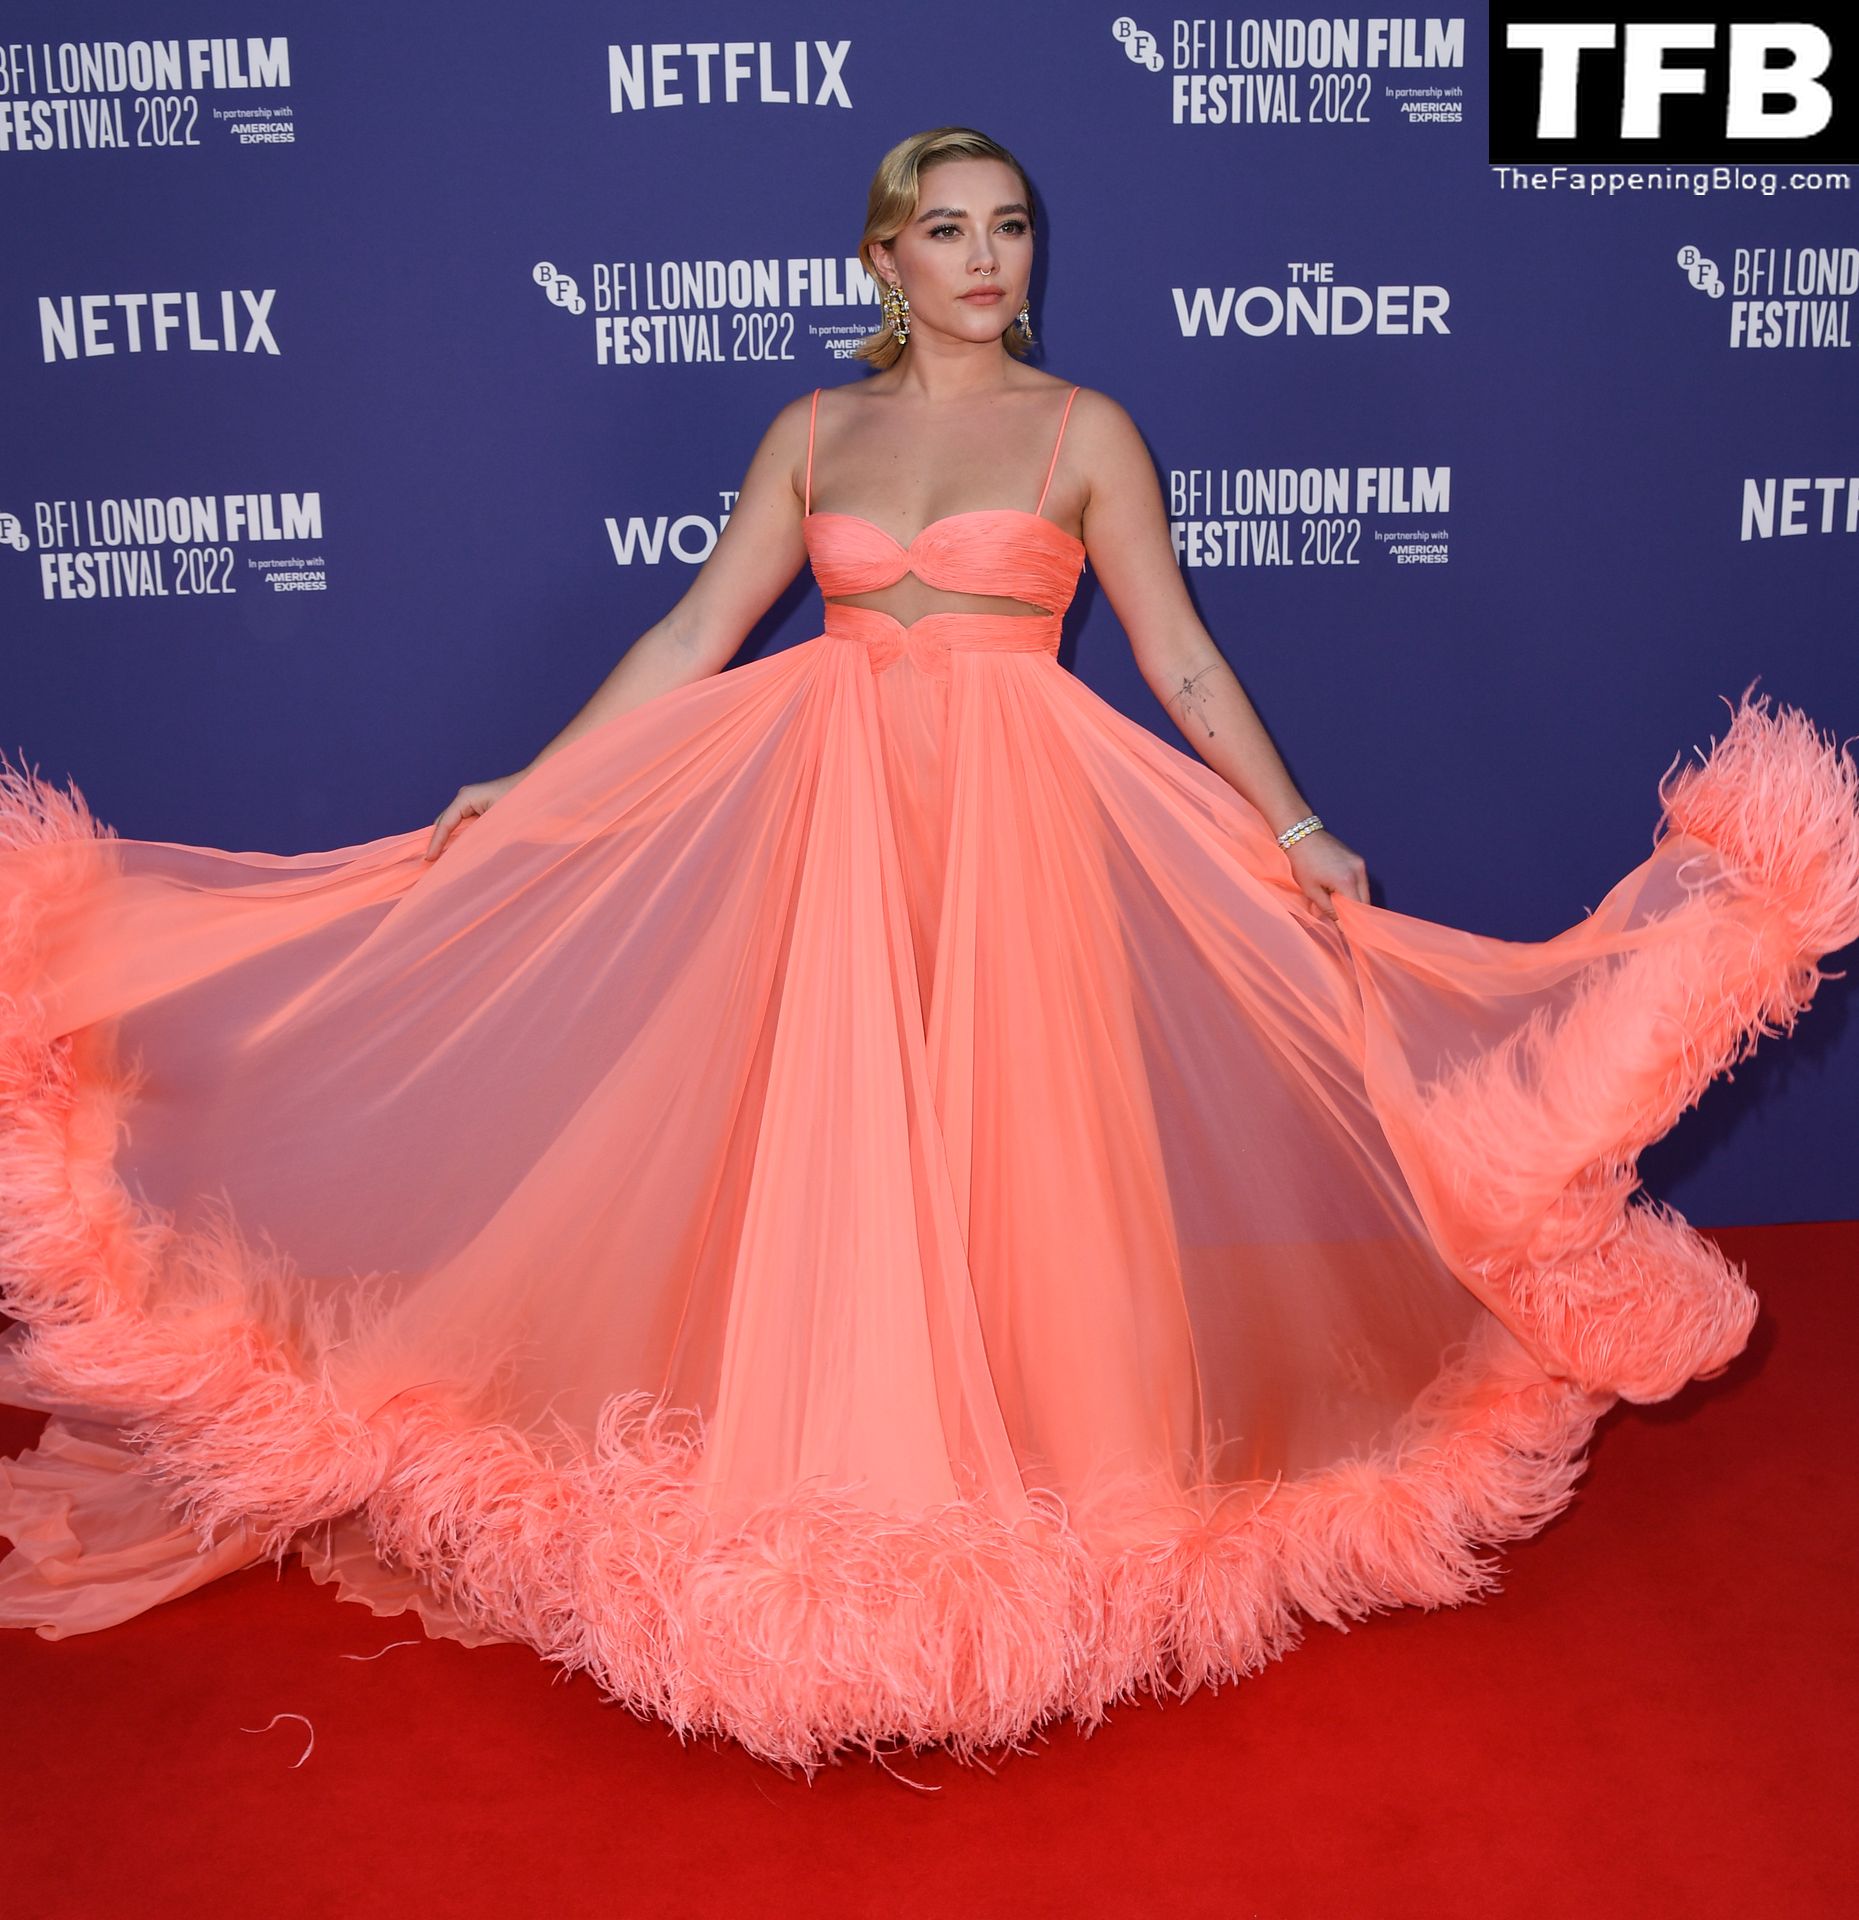 Florence-Pugh-Sexy-The-Fappening-Blog-57-1.jpg